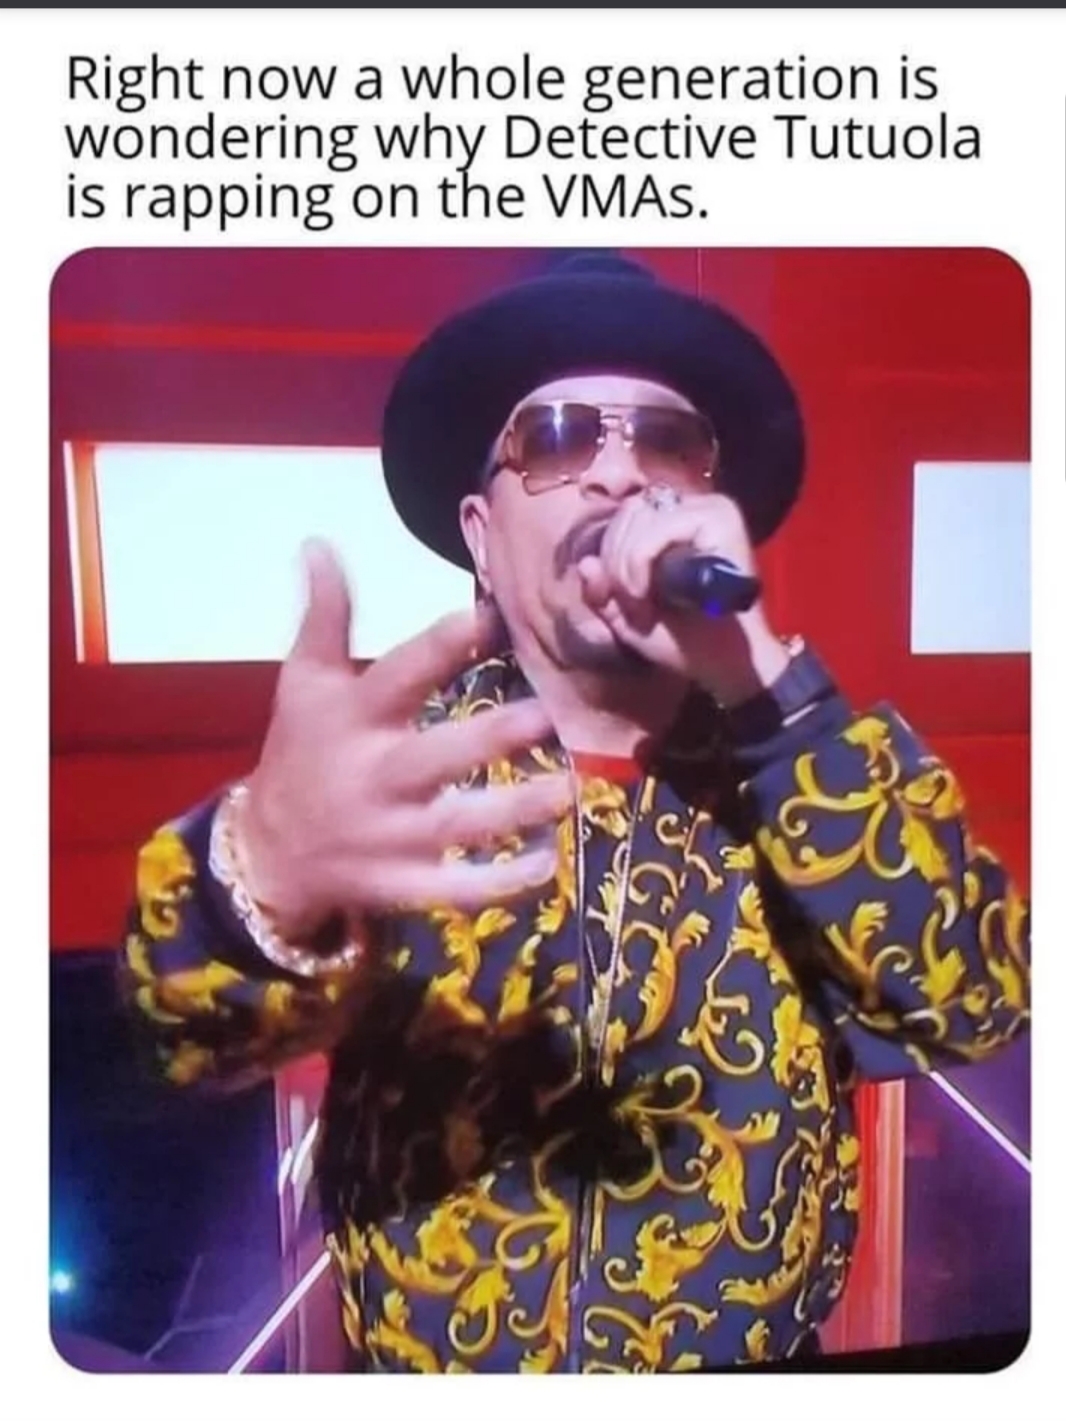 detective tutuola vma meme - Right now a whole generation is wondering why Detective Tutuola is rapping on the VMAs.